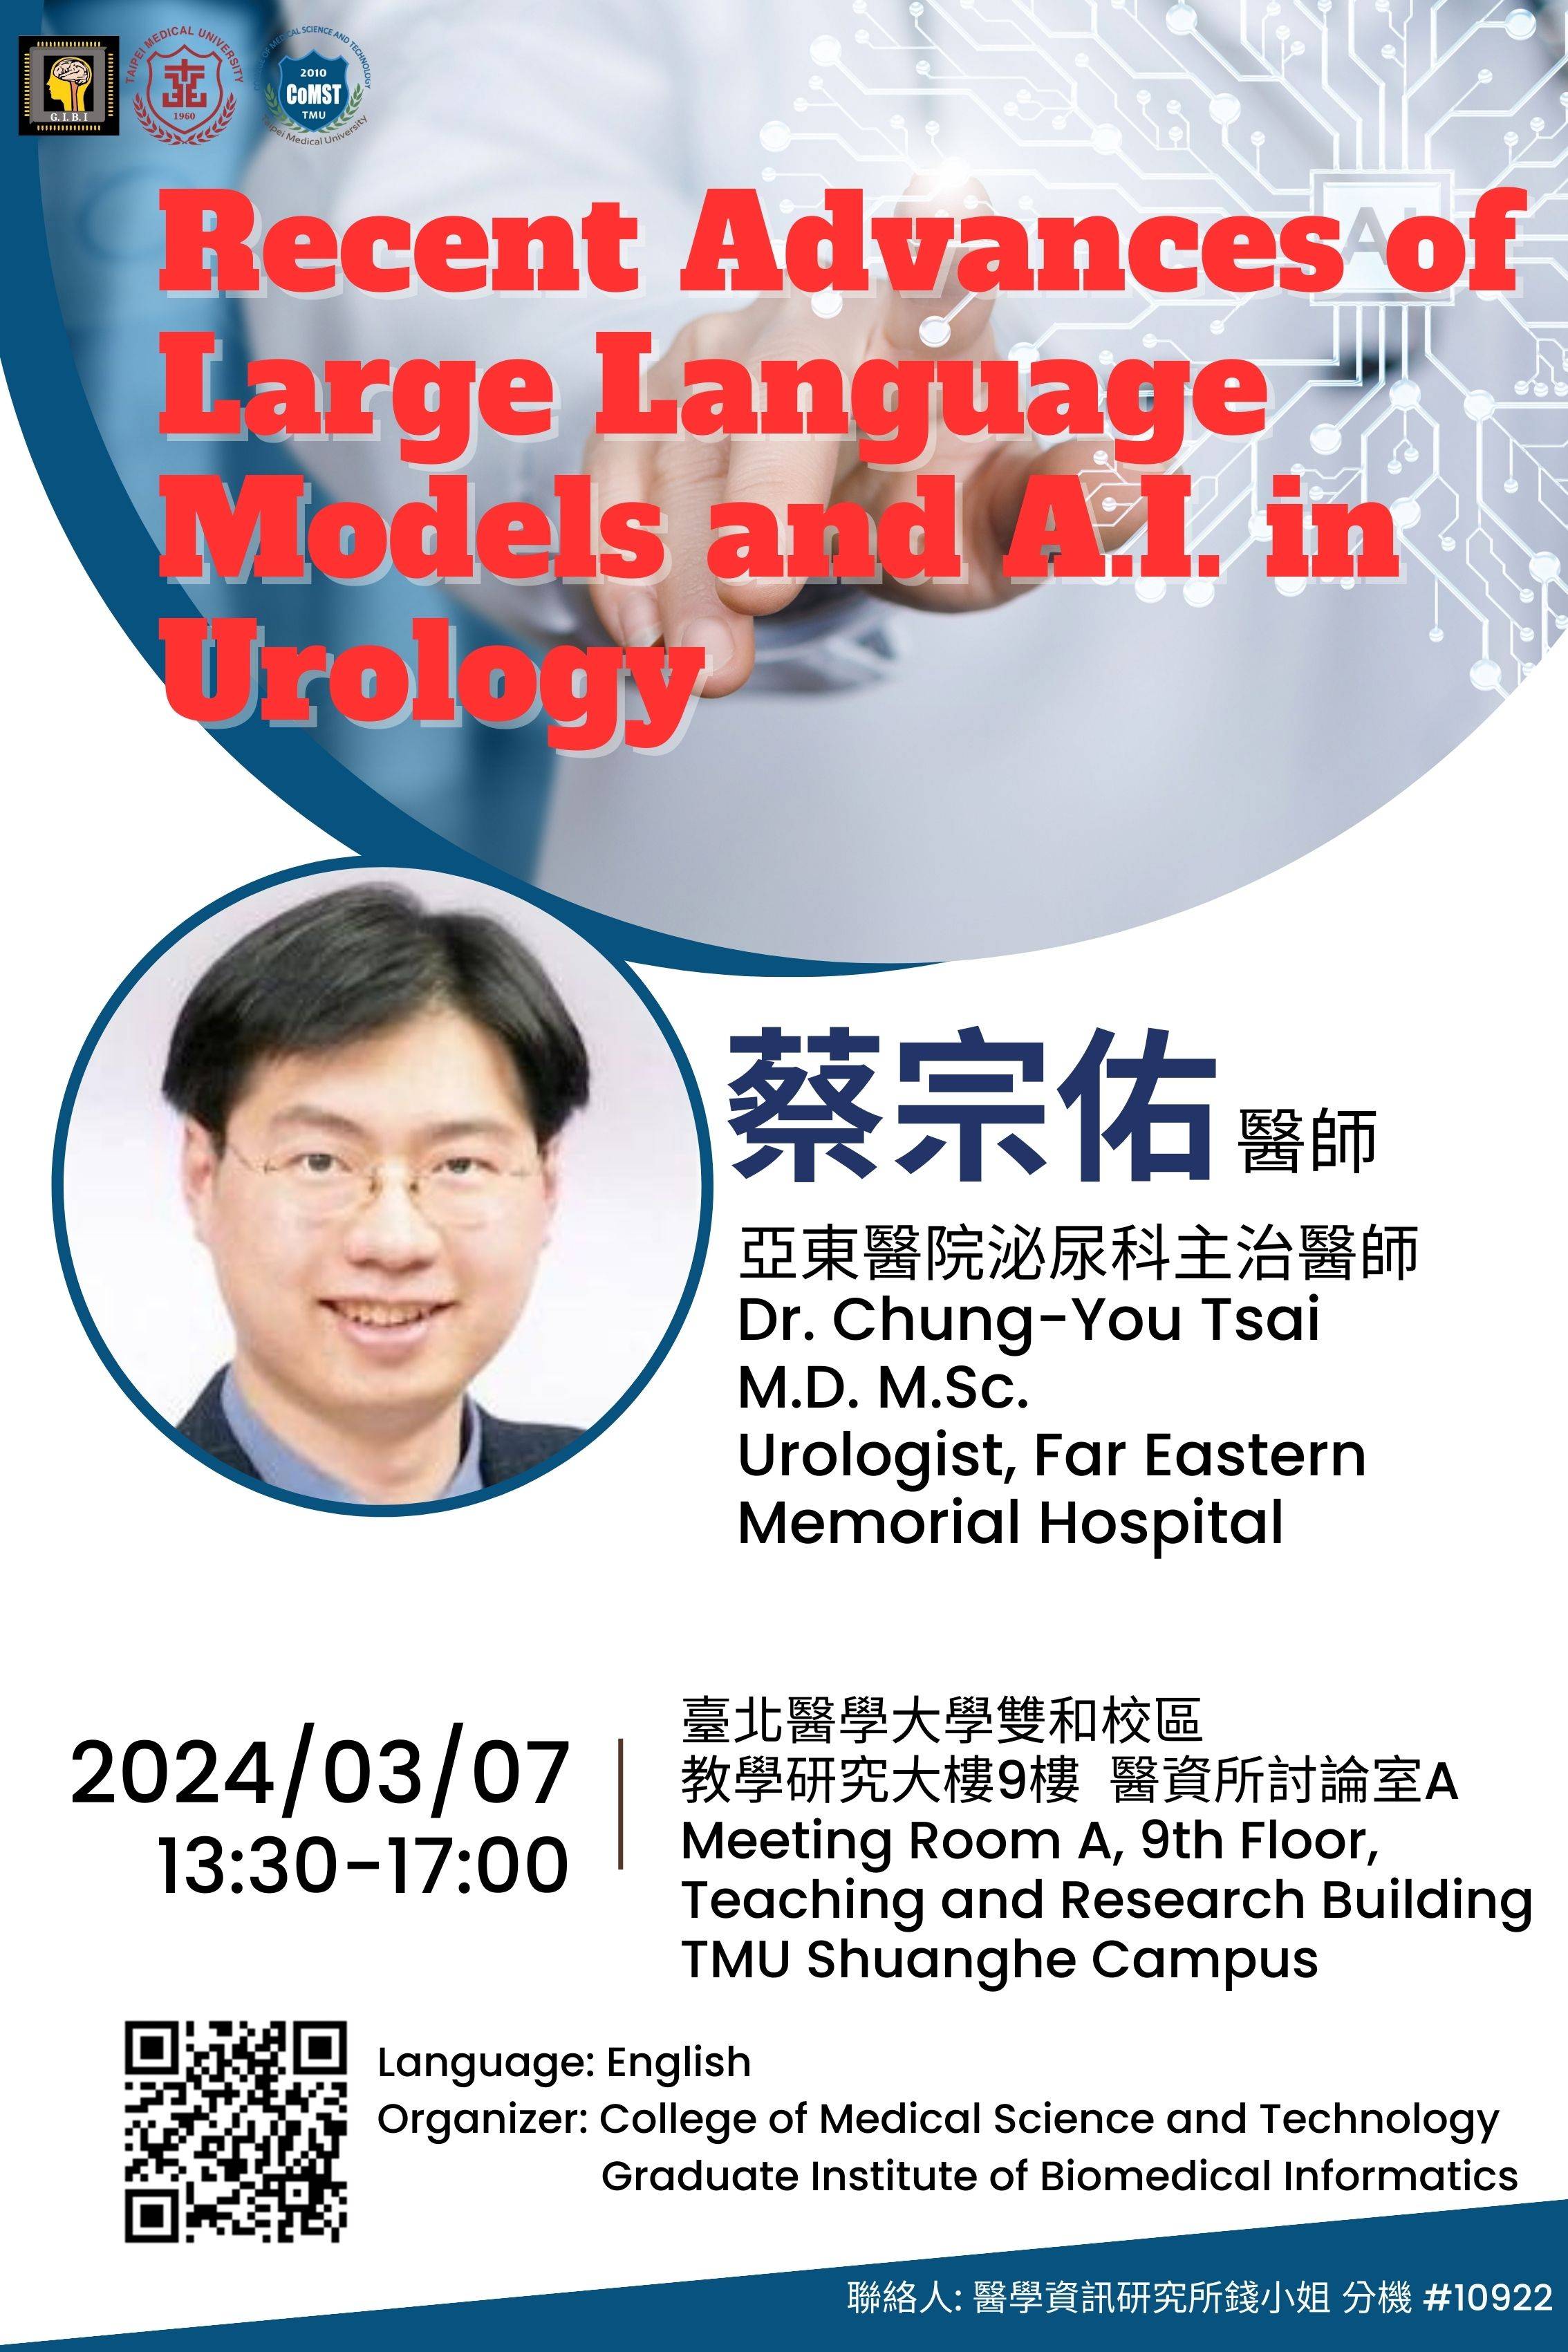 2024.03.07(W4) 13:30-15:00，Special Lecture on BIGI : Recent Advances of Large Language Models and A.I. in Urology. @Meeting Room A, 9th Floor, Teaching and Research Building, TMU Shuanghe Campus